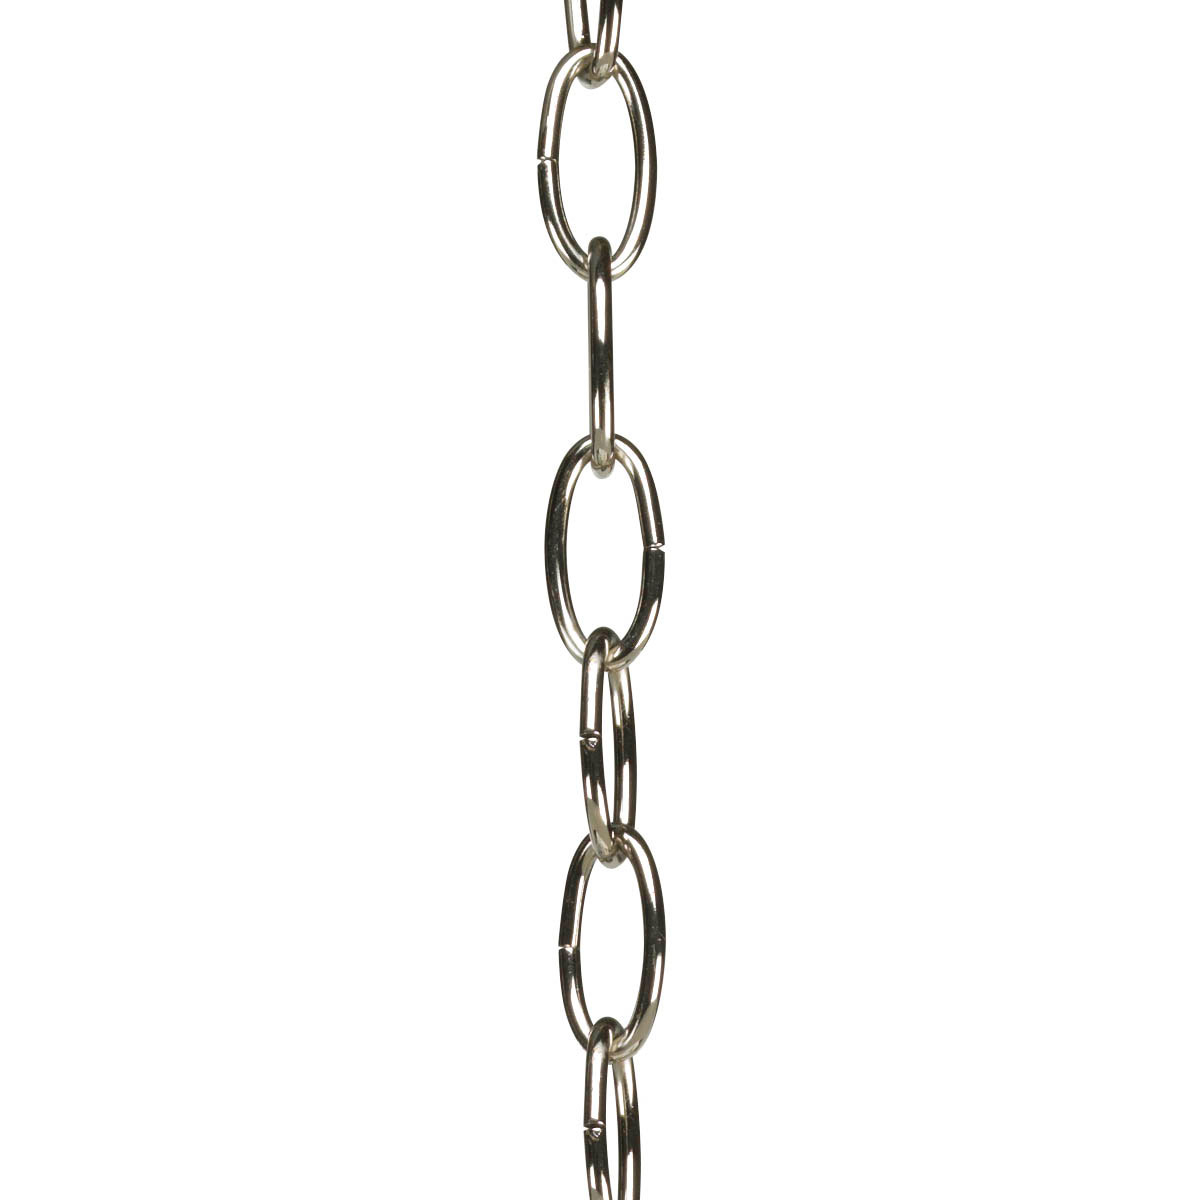 Ten feet of 9 gauge chain in Polished Nickel finish. Solid chain permits installation of chain-hung fixtures on high ceilings. Maximum fixture weight 50 lbs.